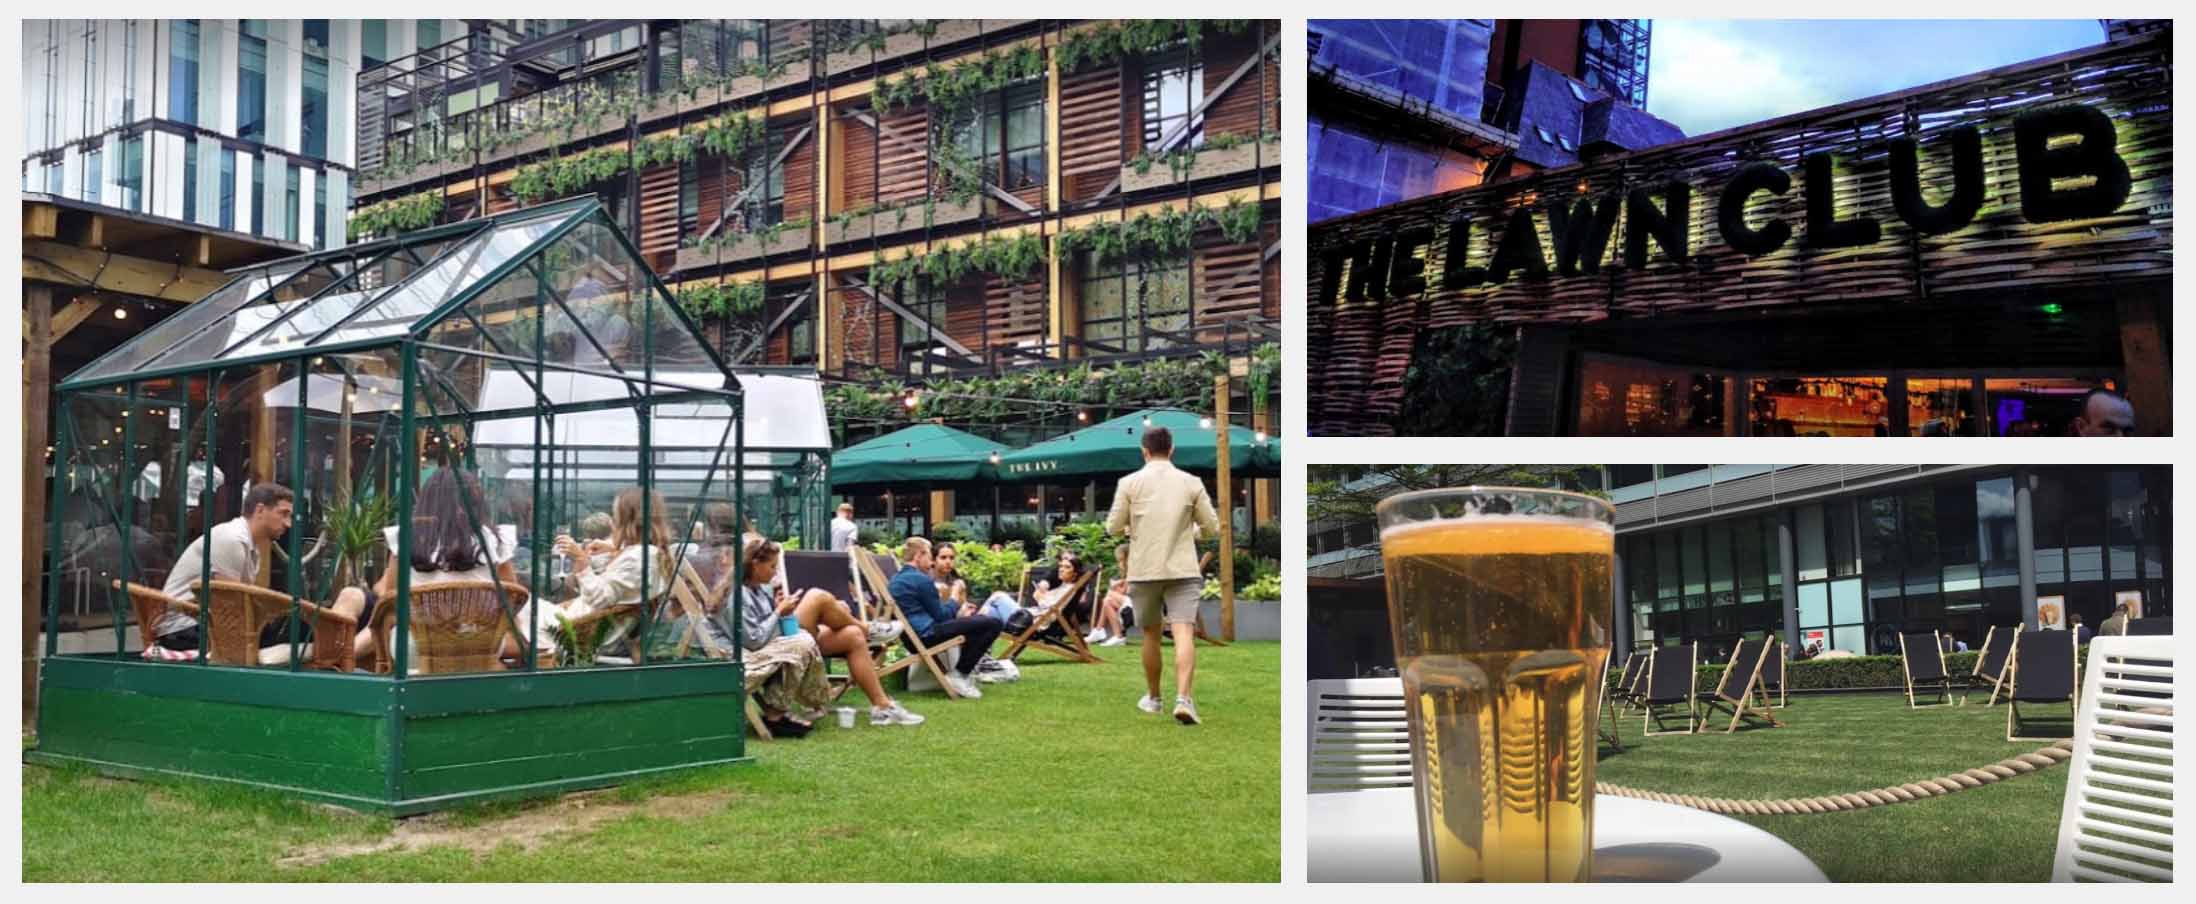 Best Beer Gardens in Manchester - The Lawn Club